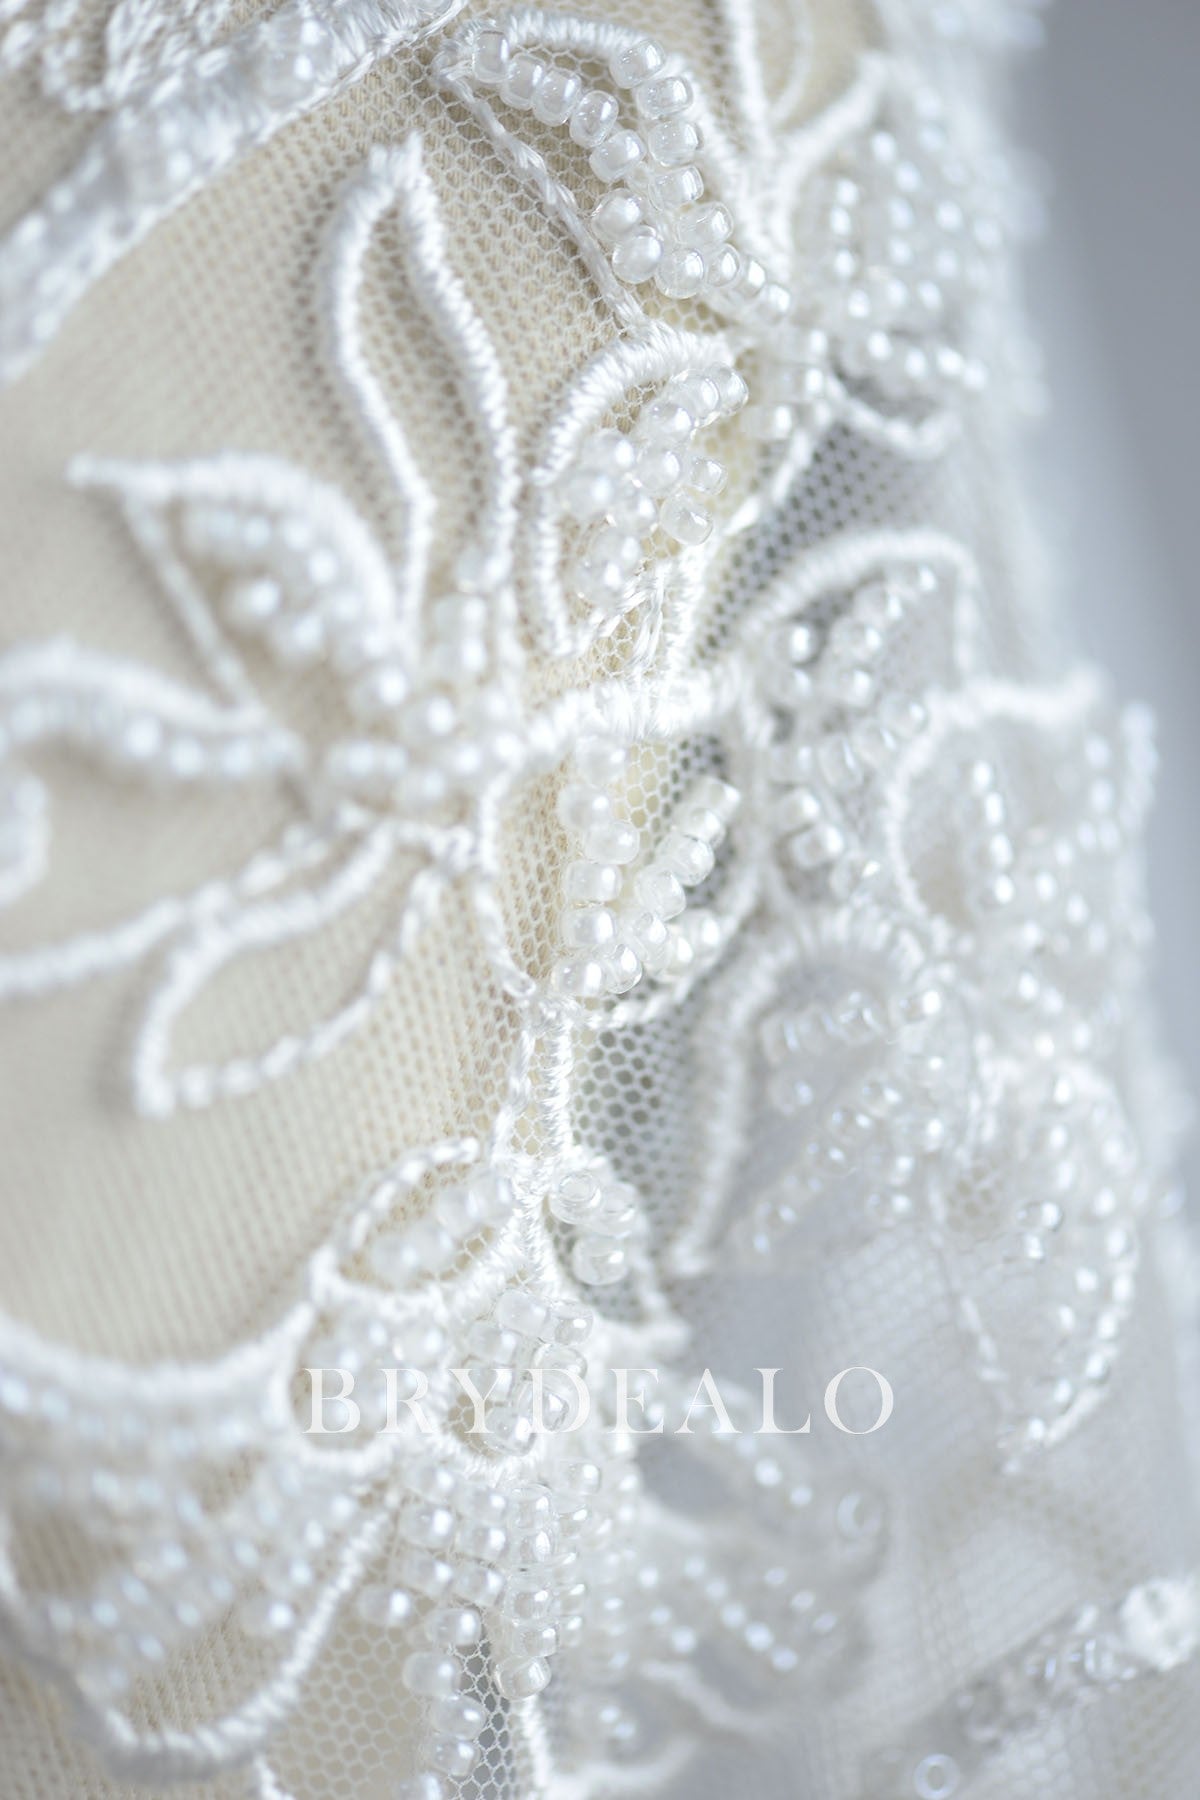 Abstract Beaded Double Border Bridal Lace